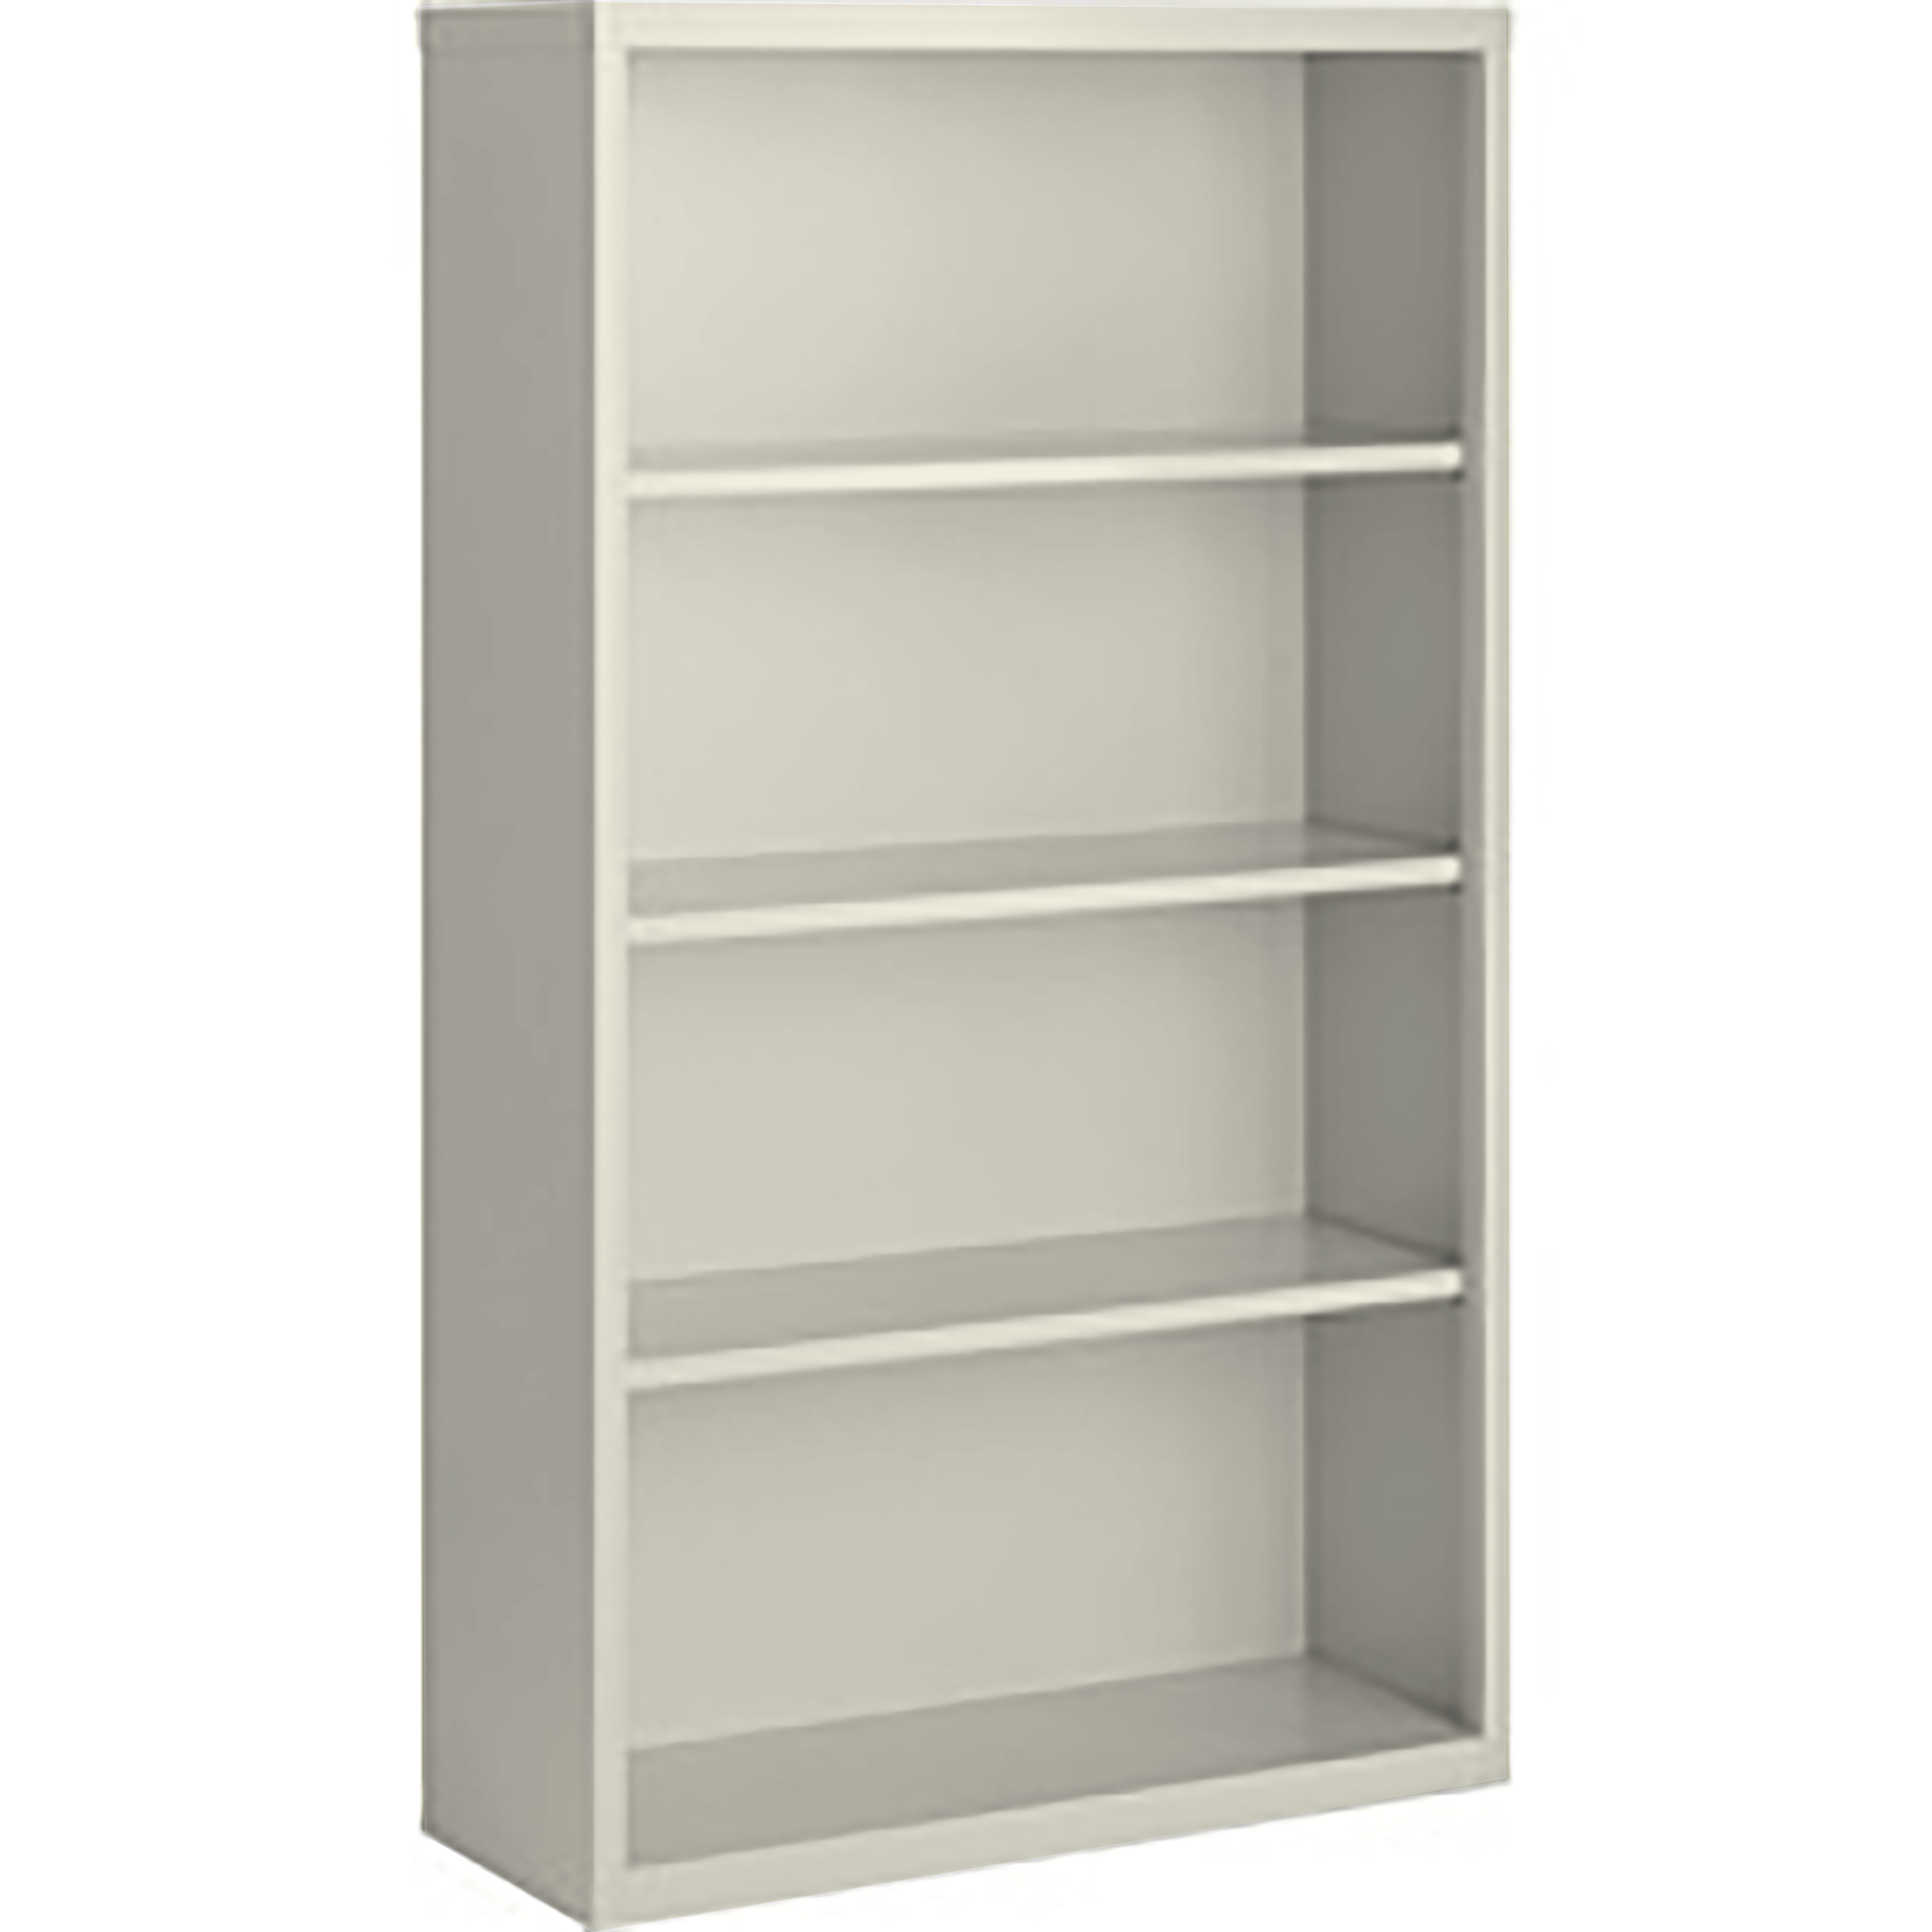 Steel Cabinets USA, 36Inchx13Inchx60Inch Putty Bookcase Steel Fully Assembled, Height 60 in, Shelves (qty.) 4, Material Steel, Model BCA-366013-P